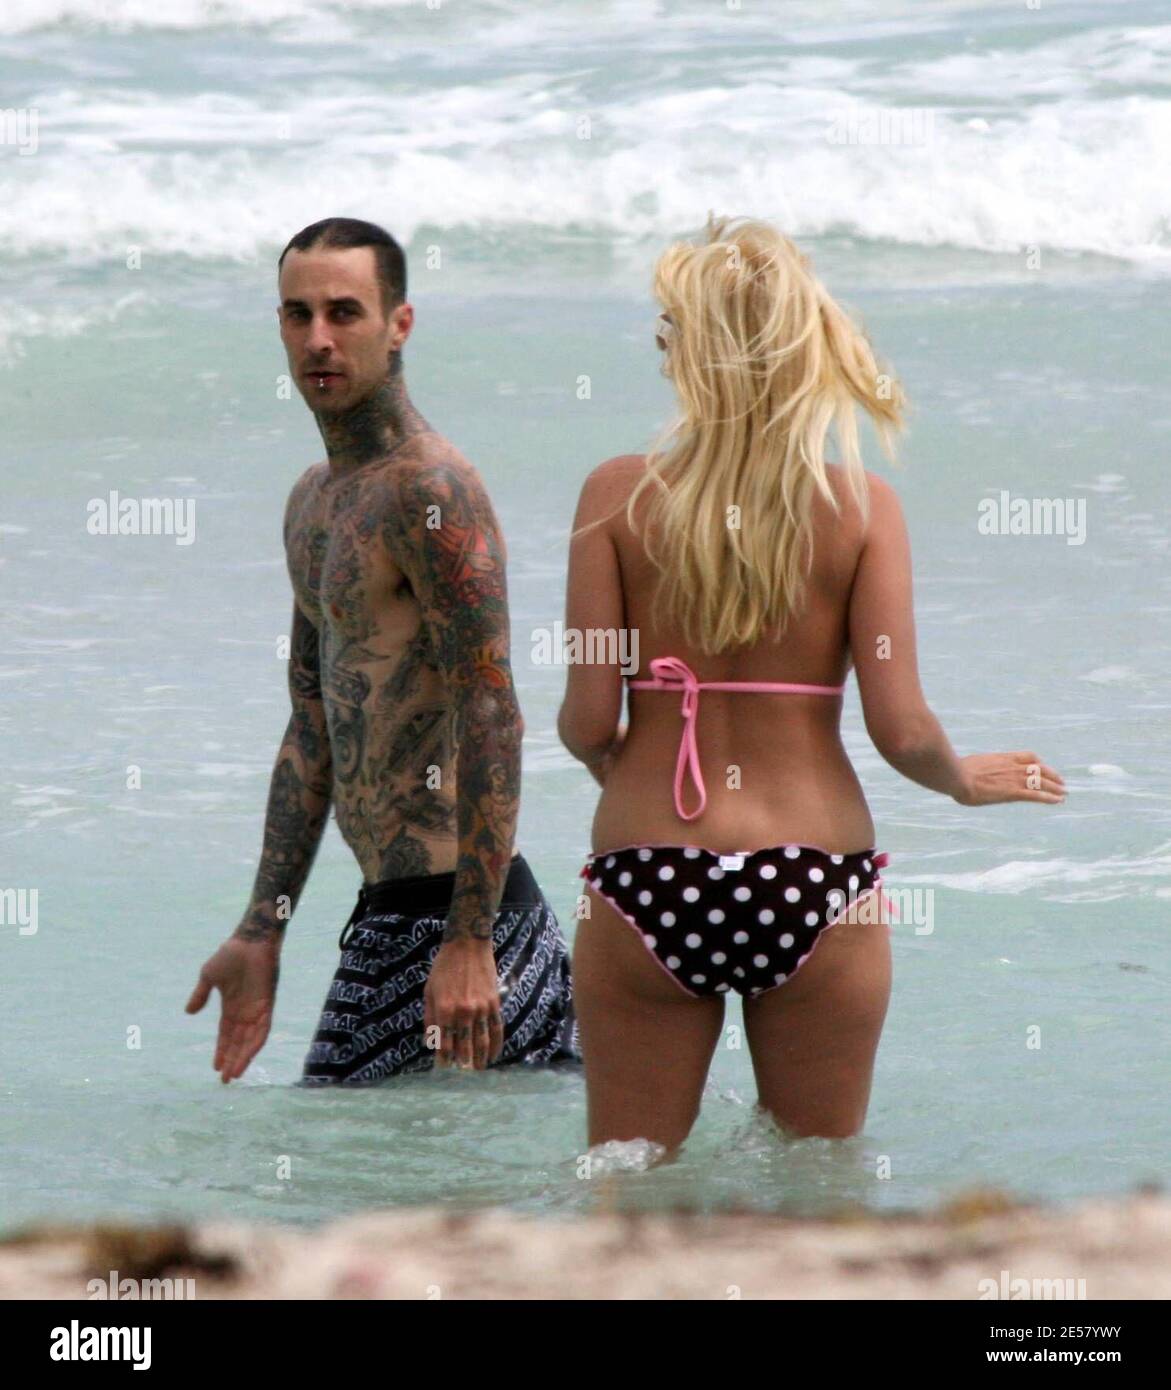 Exclusive!! Travis Barker and wife Shanna Moakler spend a second day on  Miami Beach. The couple took a dip in the ocean and fooled around in their  cabana before heading back to